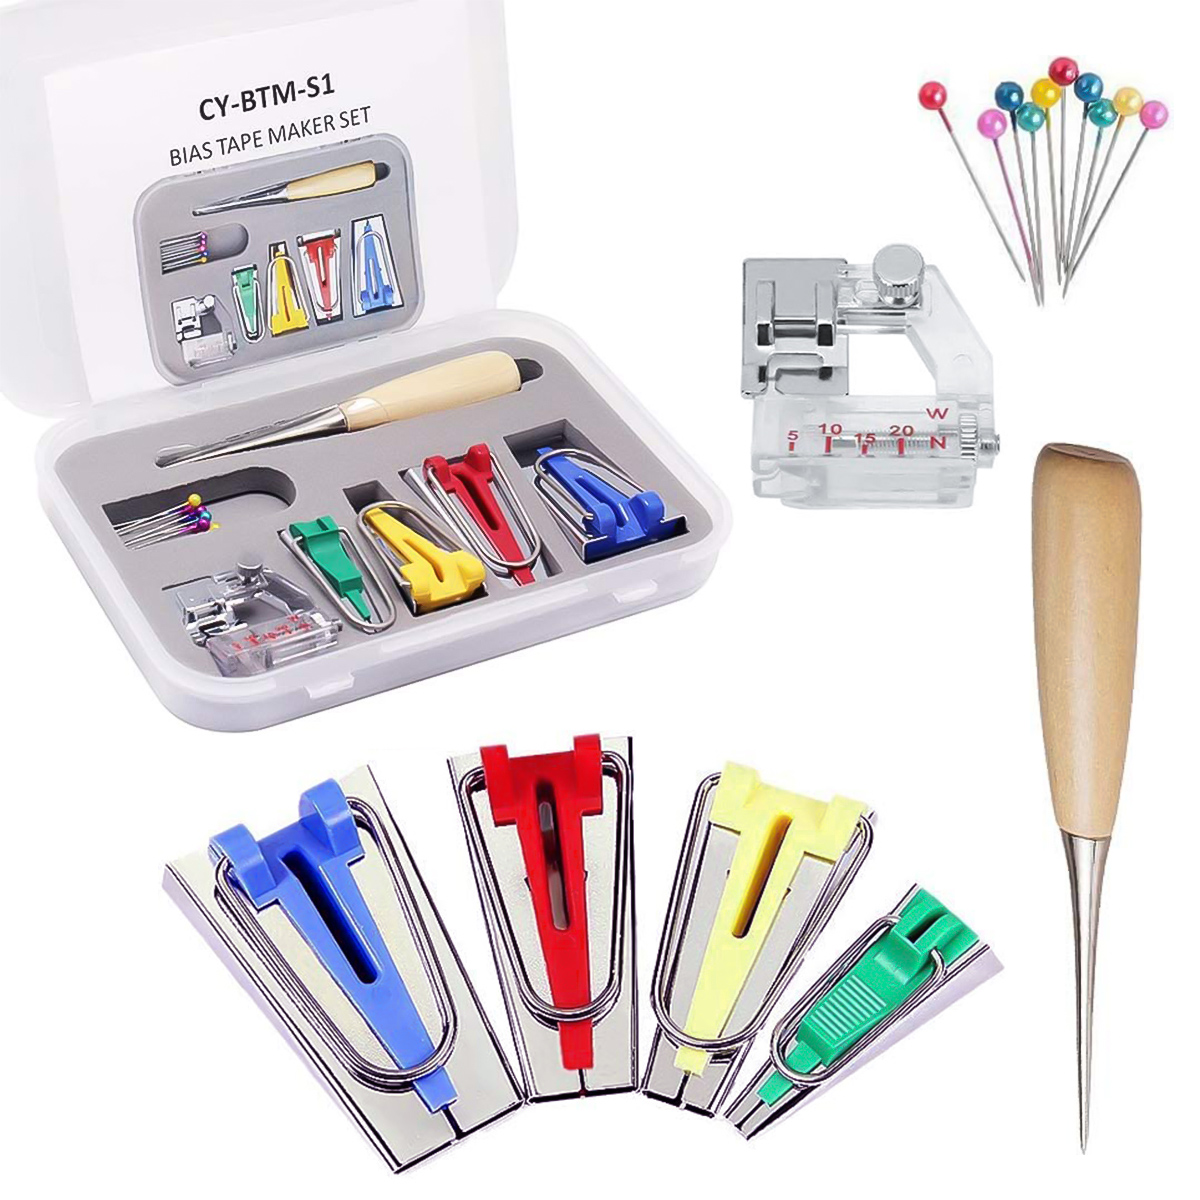 Sewing-Tape-Maker-Kits-4-Sizes-6MM-12MM-18MM-25MM-Household-DIY-Fabric-Patchwork-Sewing-Accessories--1707094-1